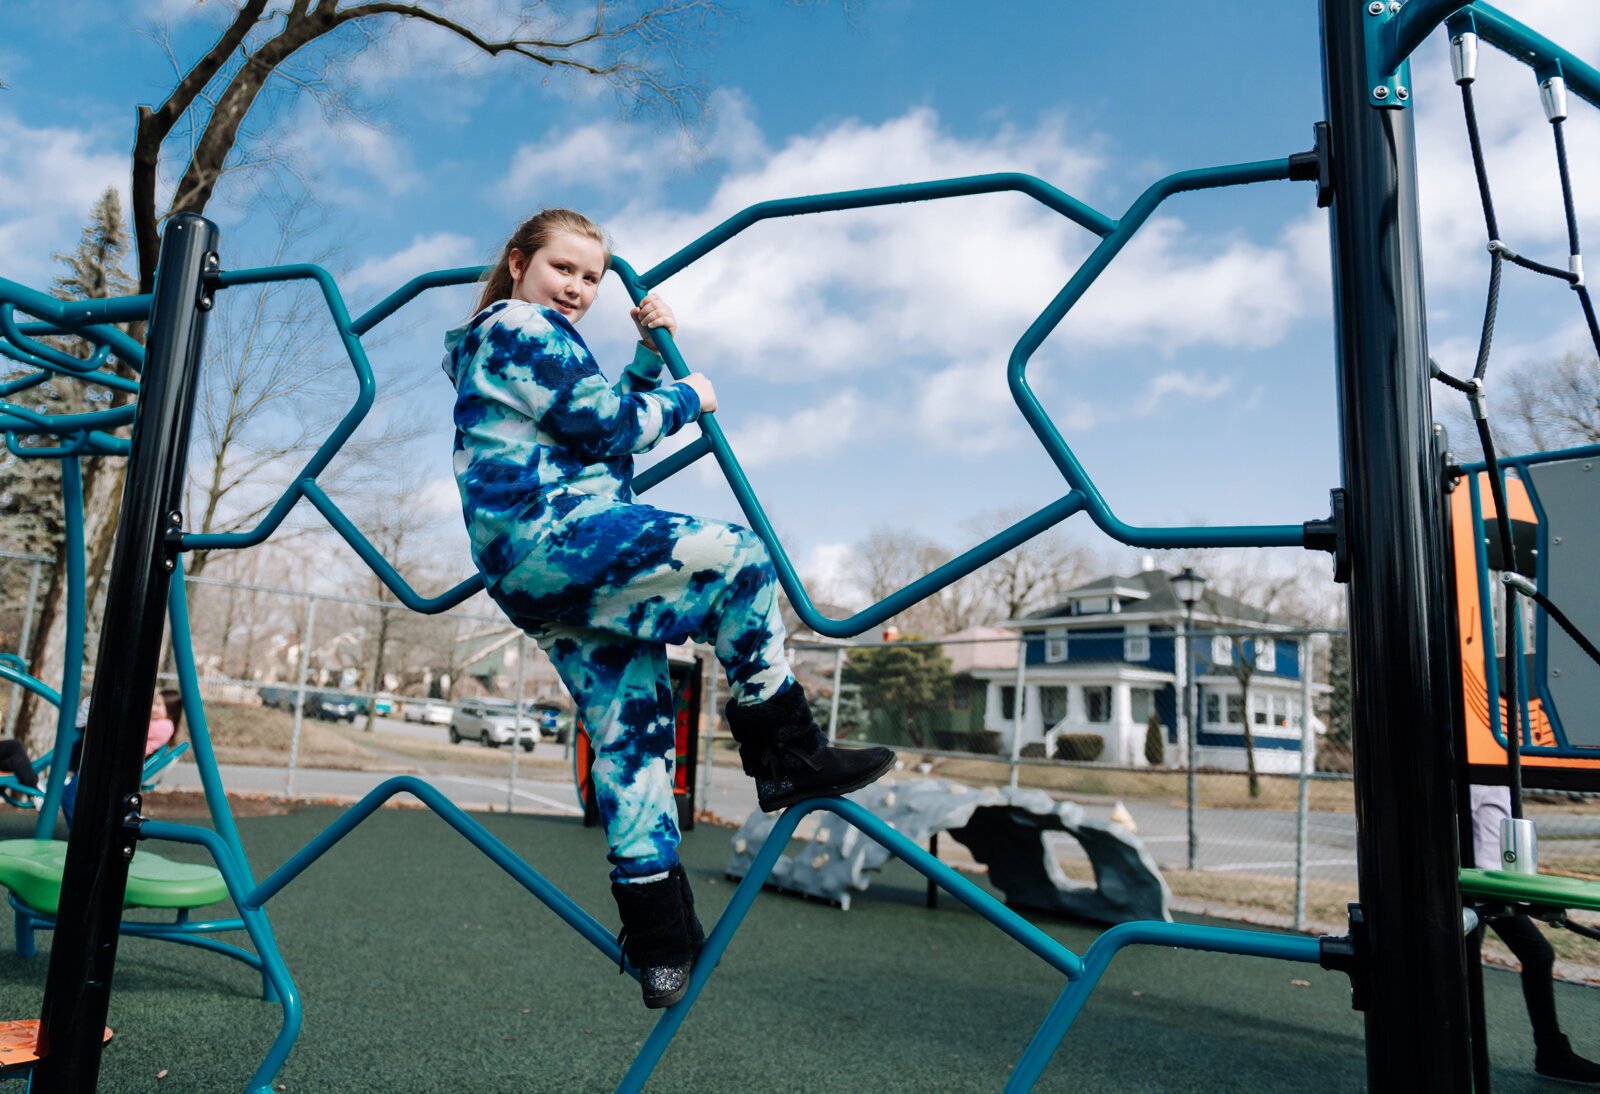 Karissa Kuntz enjoys climbing on the palyground during the fourth grade recess at Forest Park Elementary School.